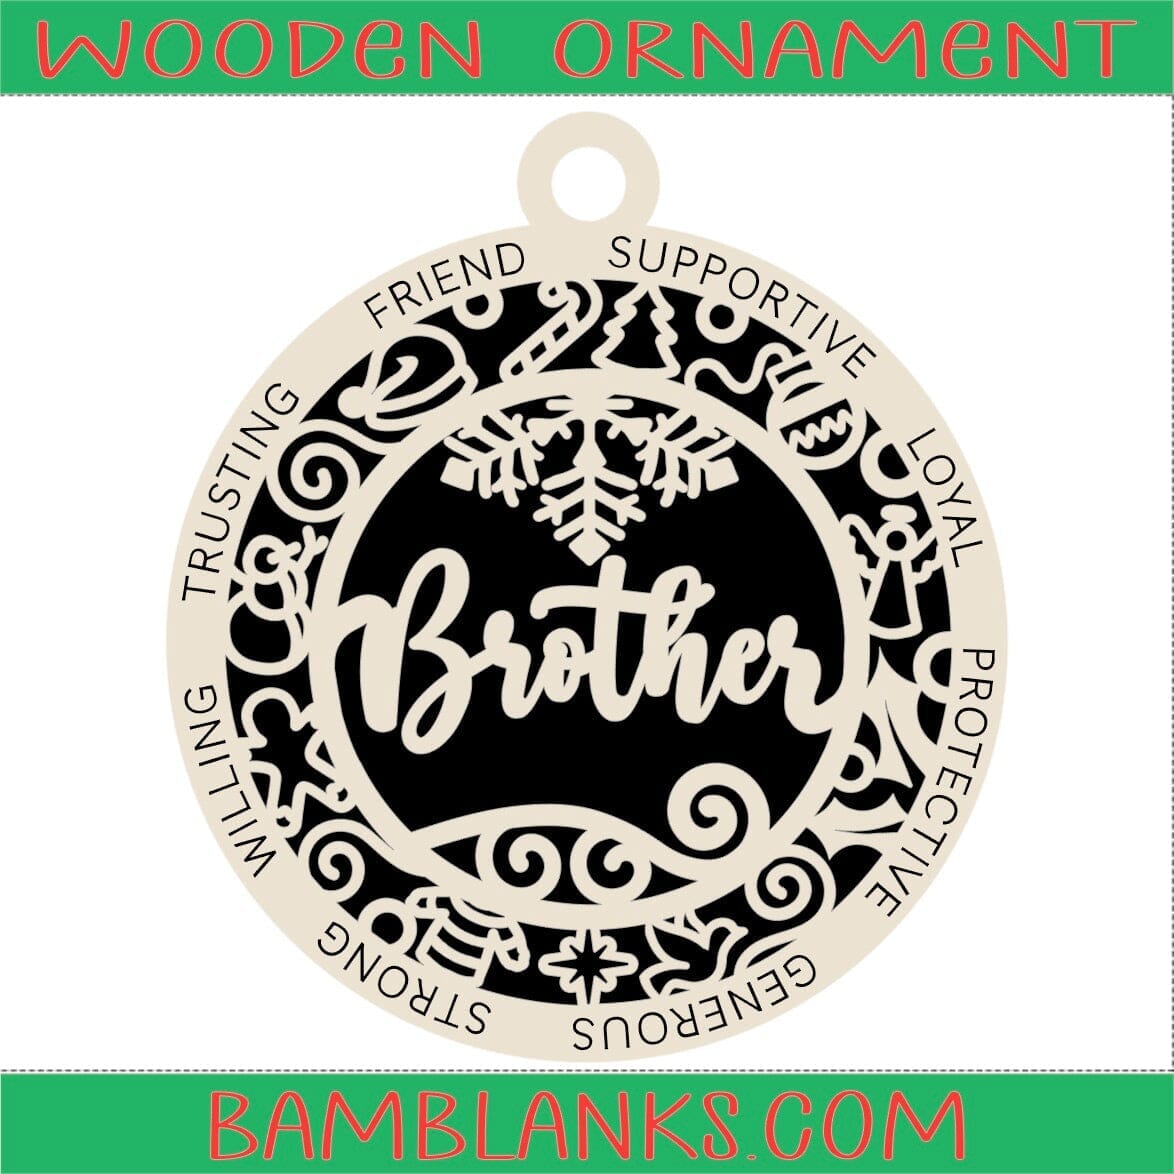 Brother - Wood Ornament #W106